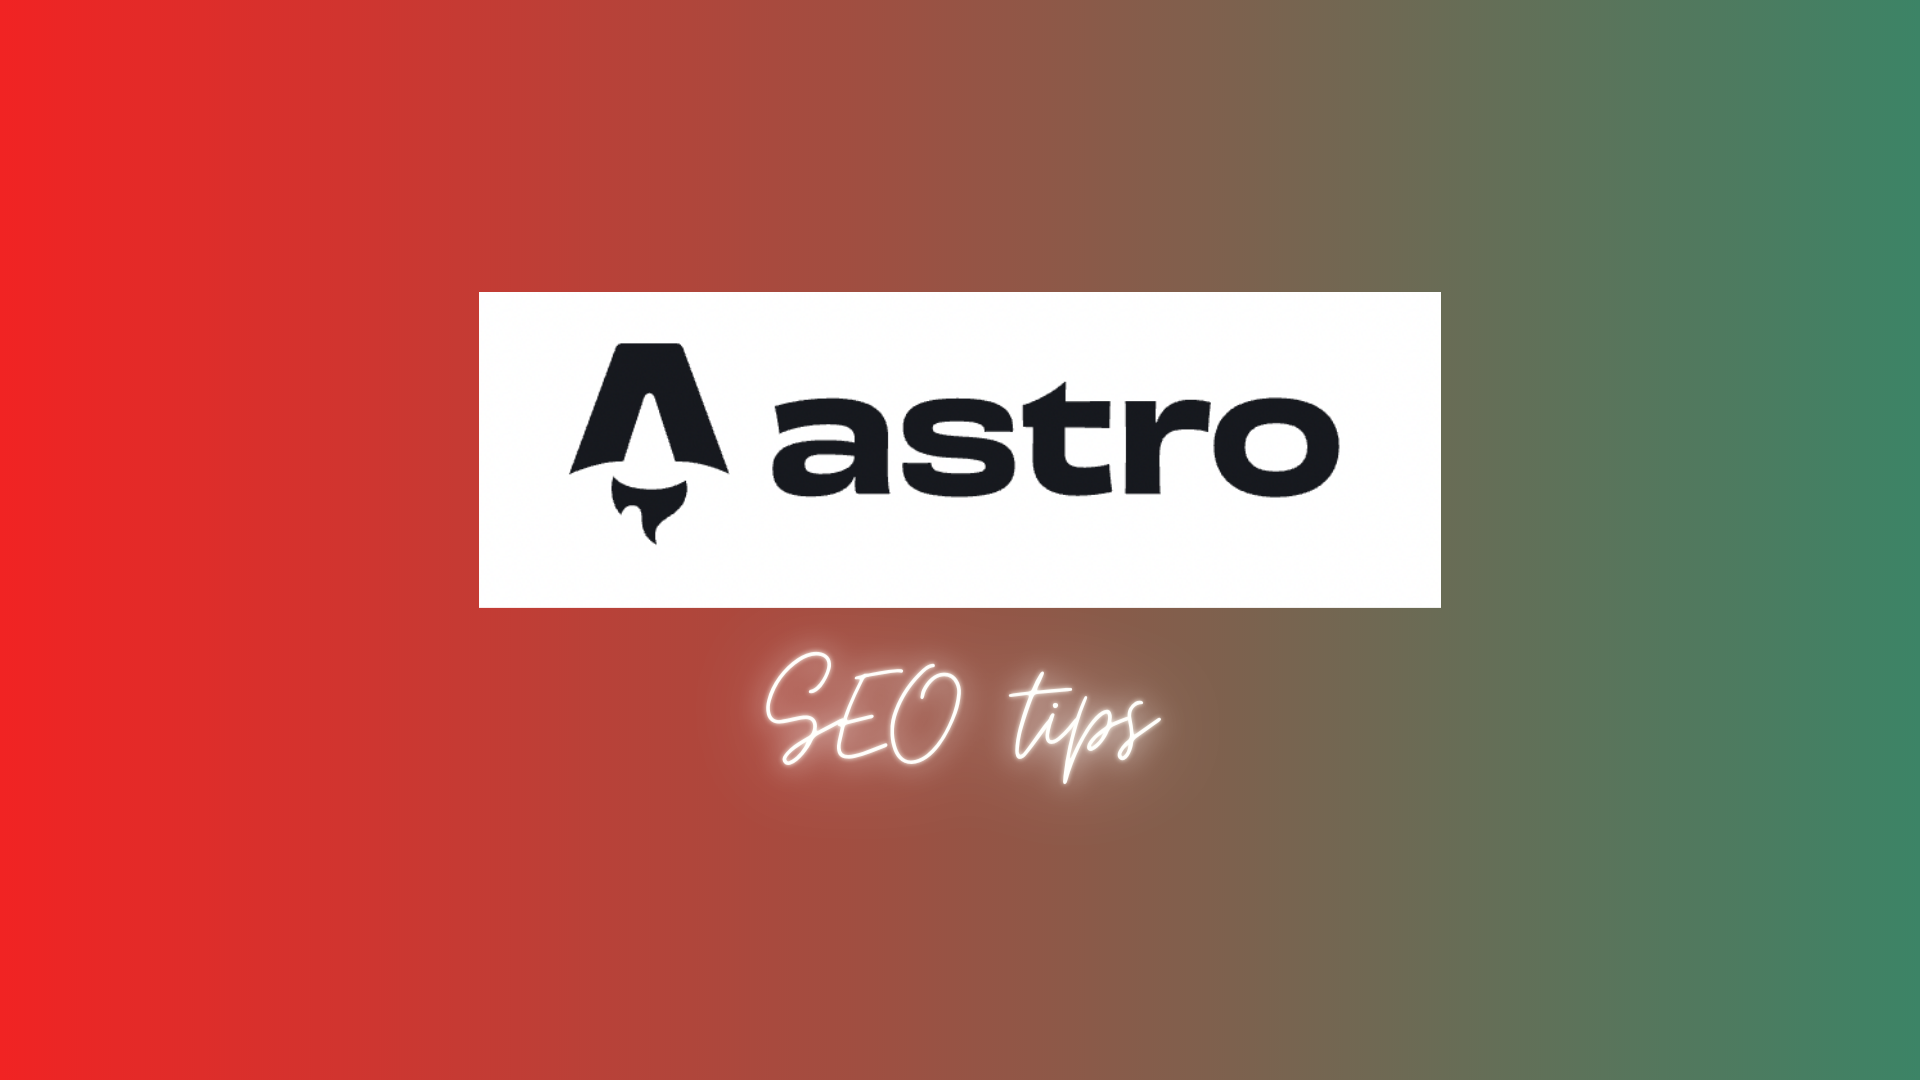 Astro SEO tips on a blended red and turquoise background, with Astro logo. 